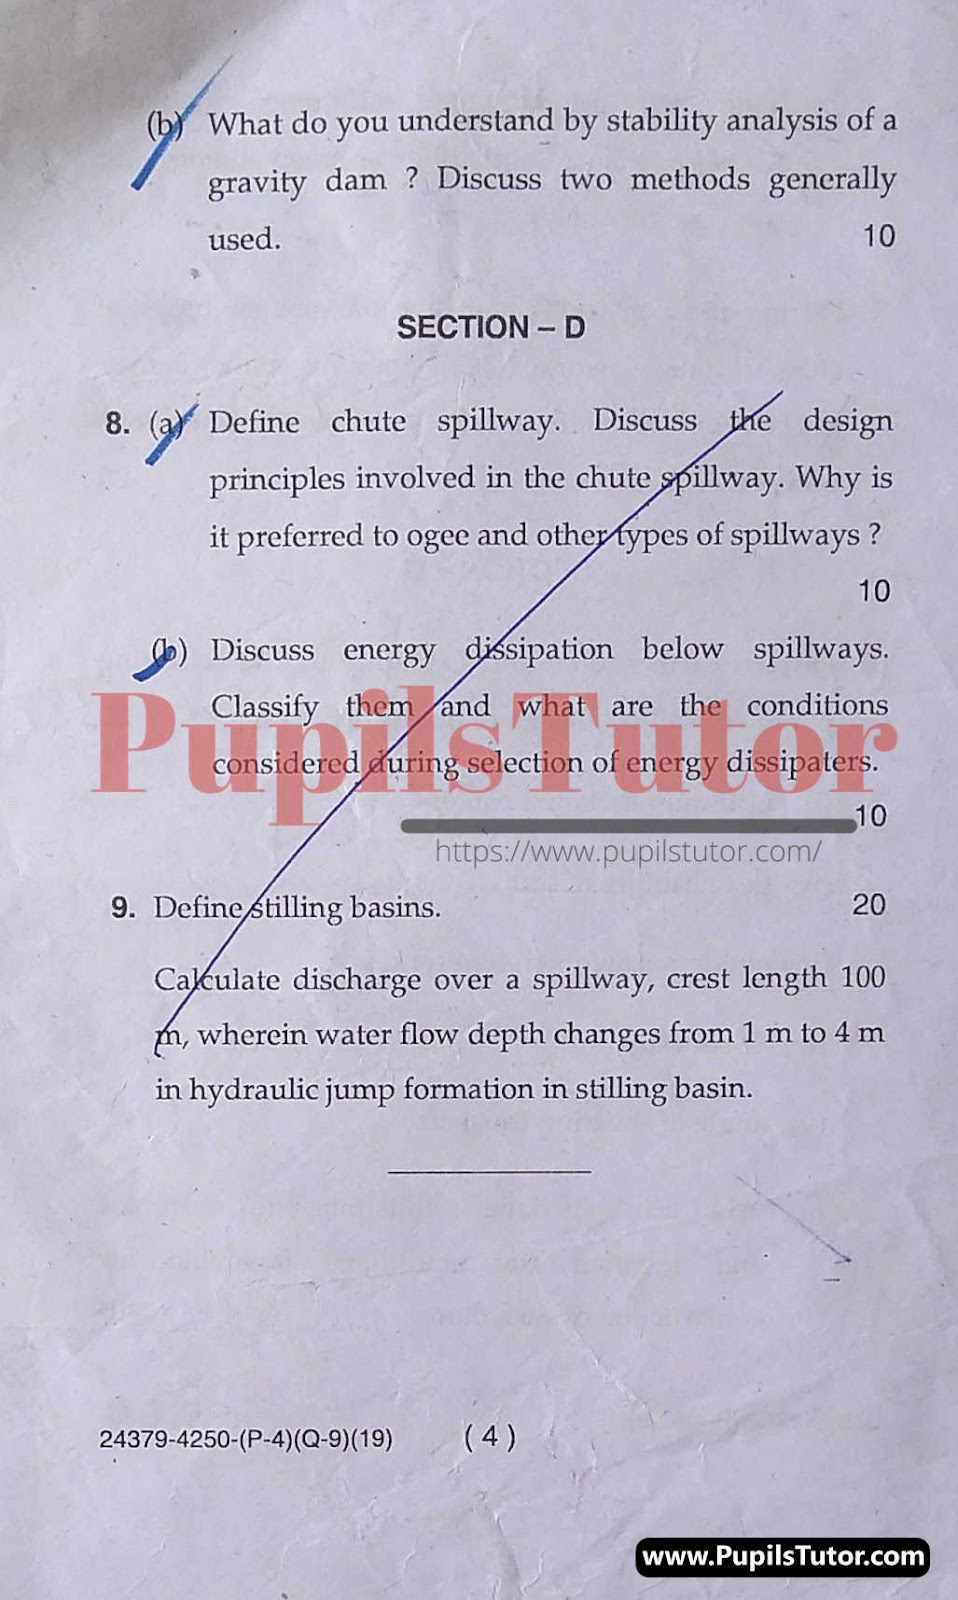 MDU (Maharshi Dayanand University, Rohtak Haryana) Regular Exam (B.Tech (Civil) – Bachelor of Technology) Irrigation Engineering Important Questions Of May, 2019 Exam PDF Download Free (Page 4)